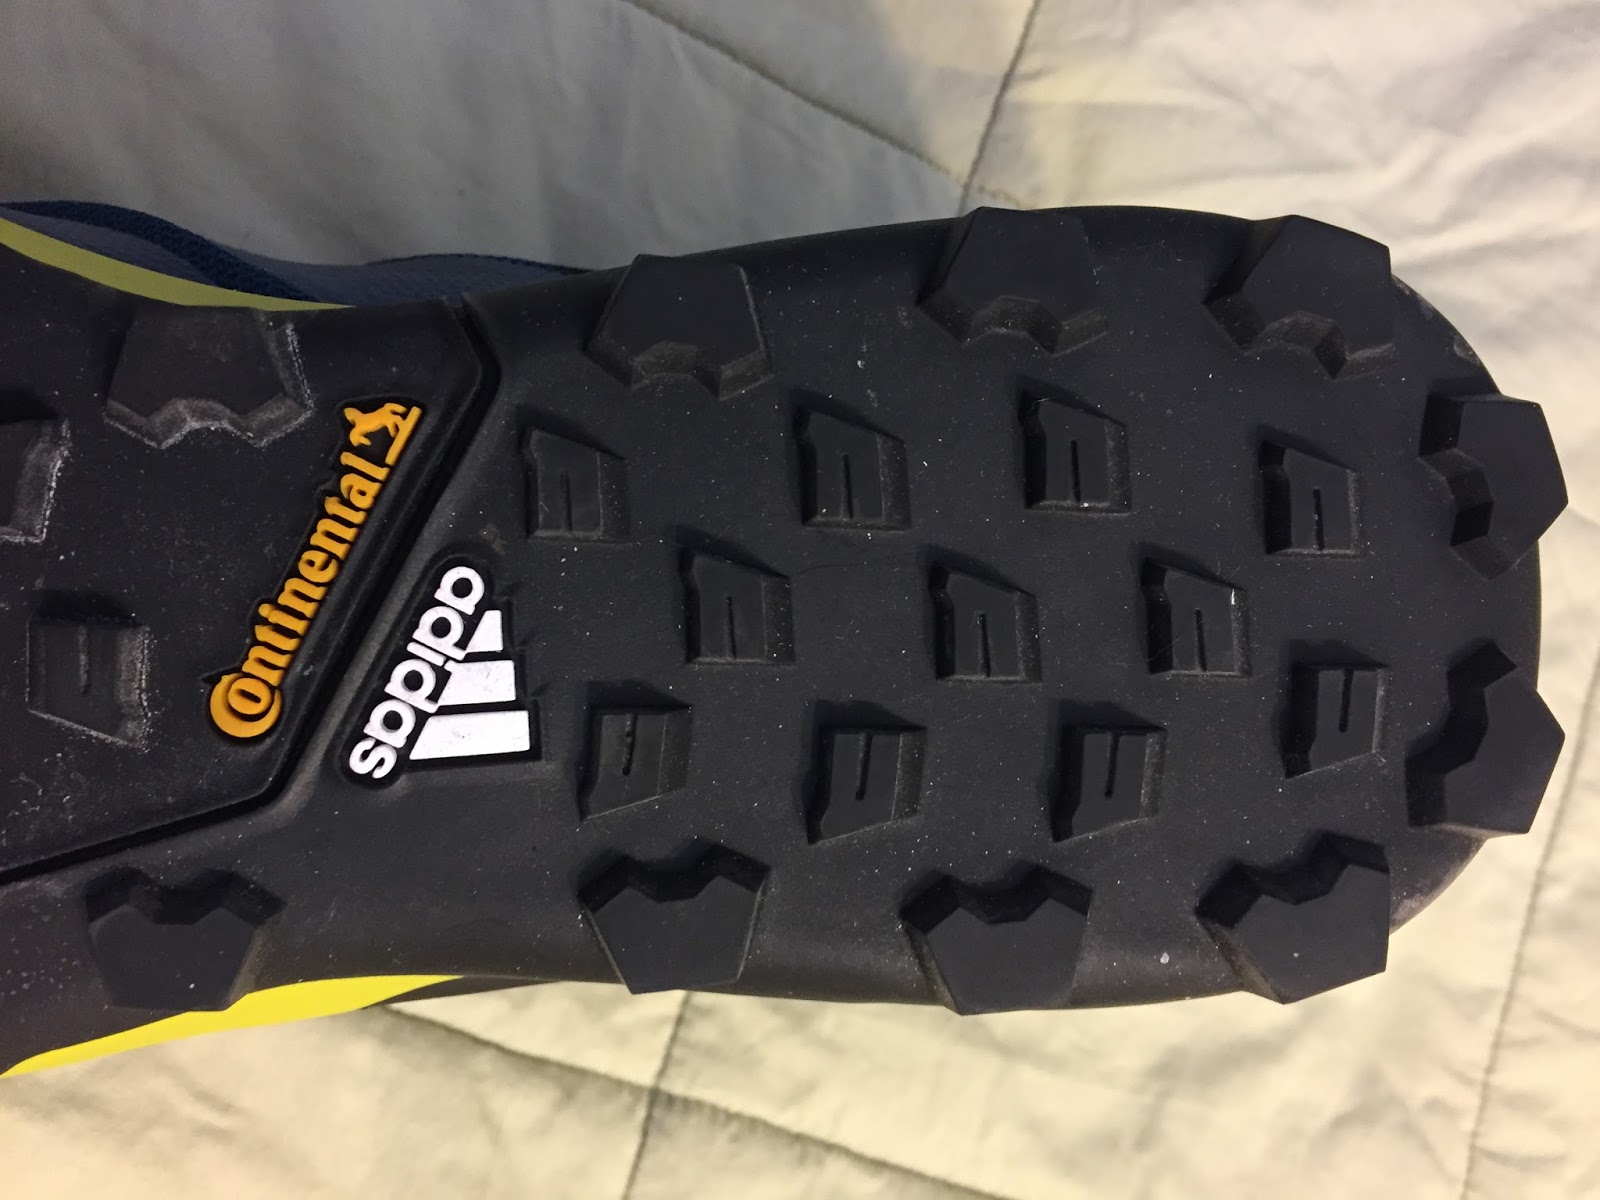 Road Trail Run: adidas Terrex Trailmaker - Up Trail Trainer/Racer with Amazing Grip and Versatility